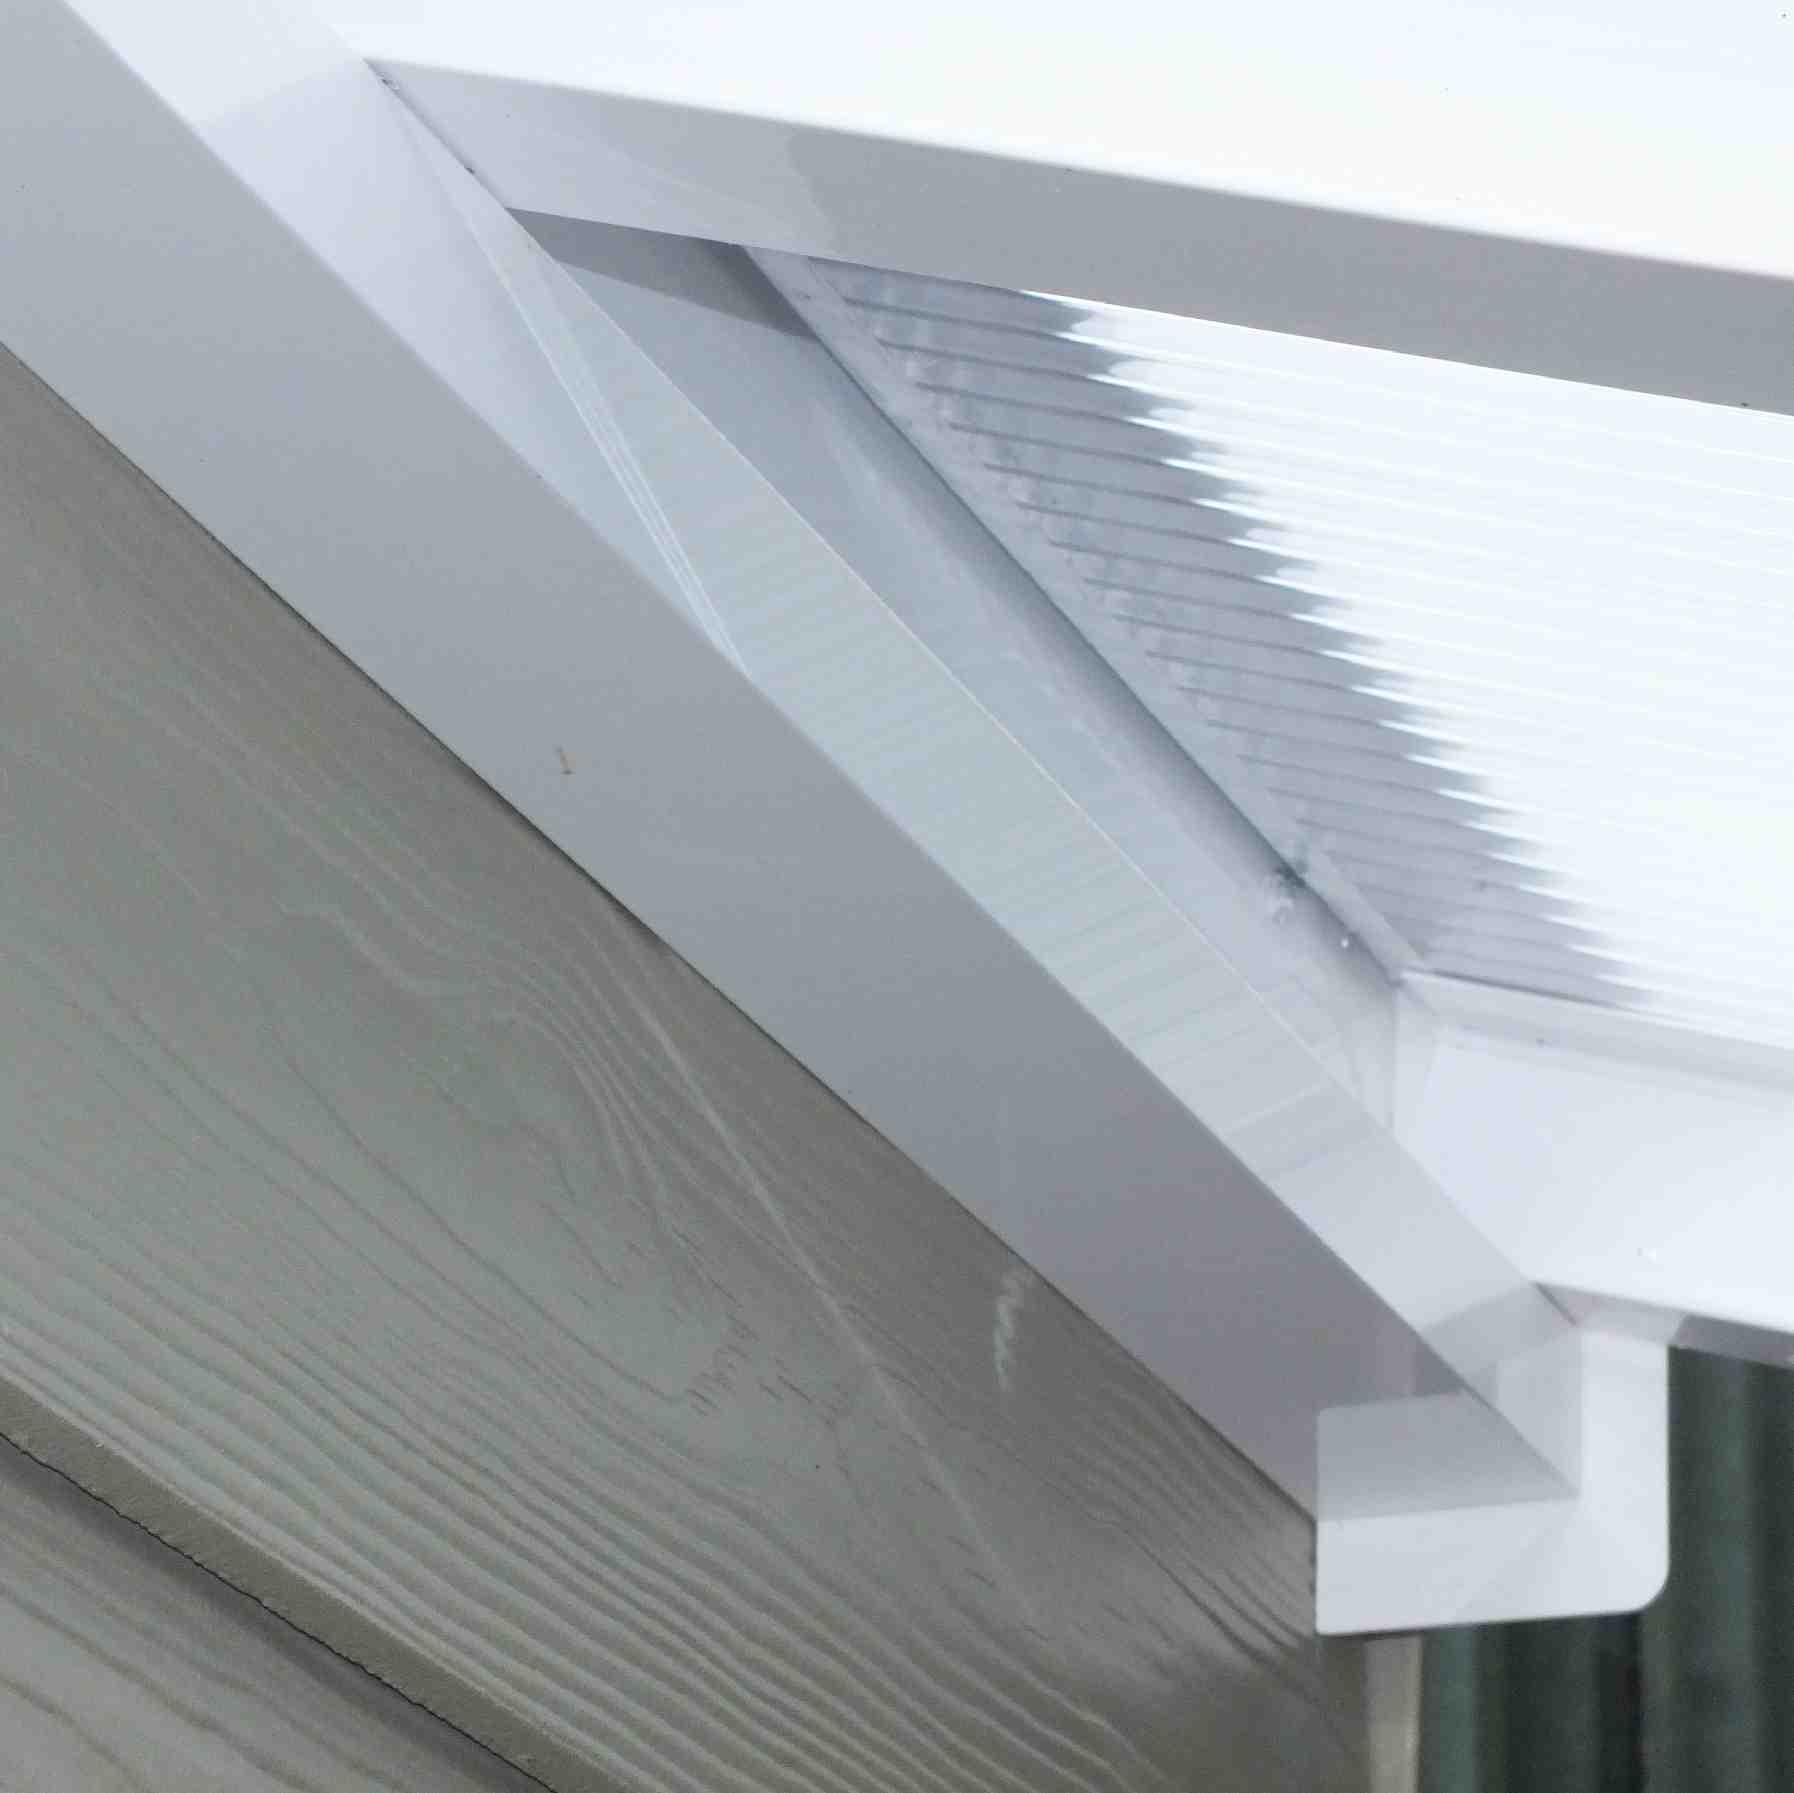 Great deals on Omega Verandah White with 6mm Glass Clear Plate Polycarbonate Glazing - 8.4m (W) x 1.5m (P), (4) Supporting Posts